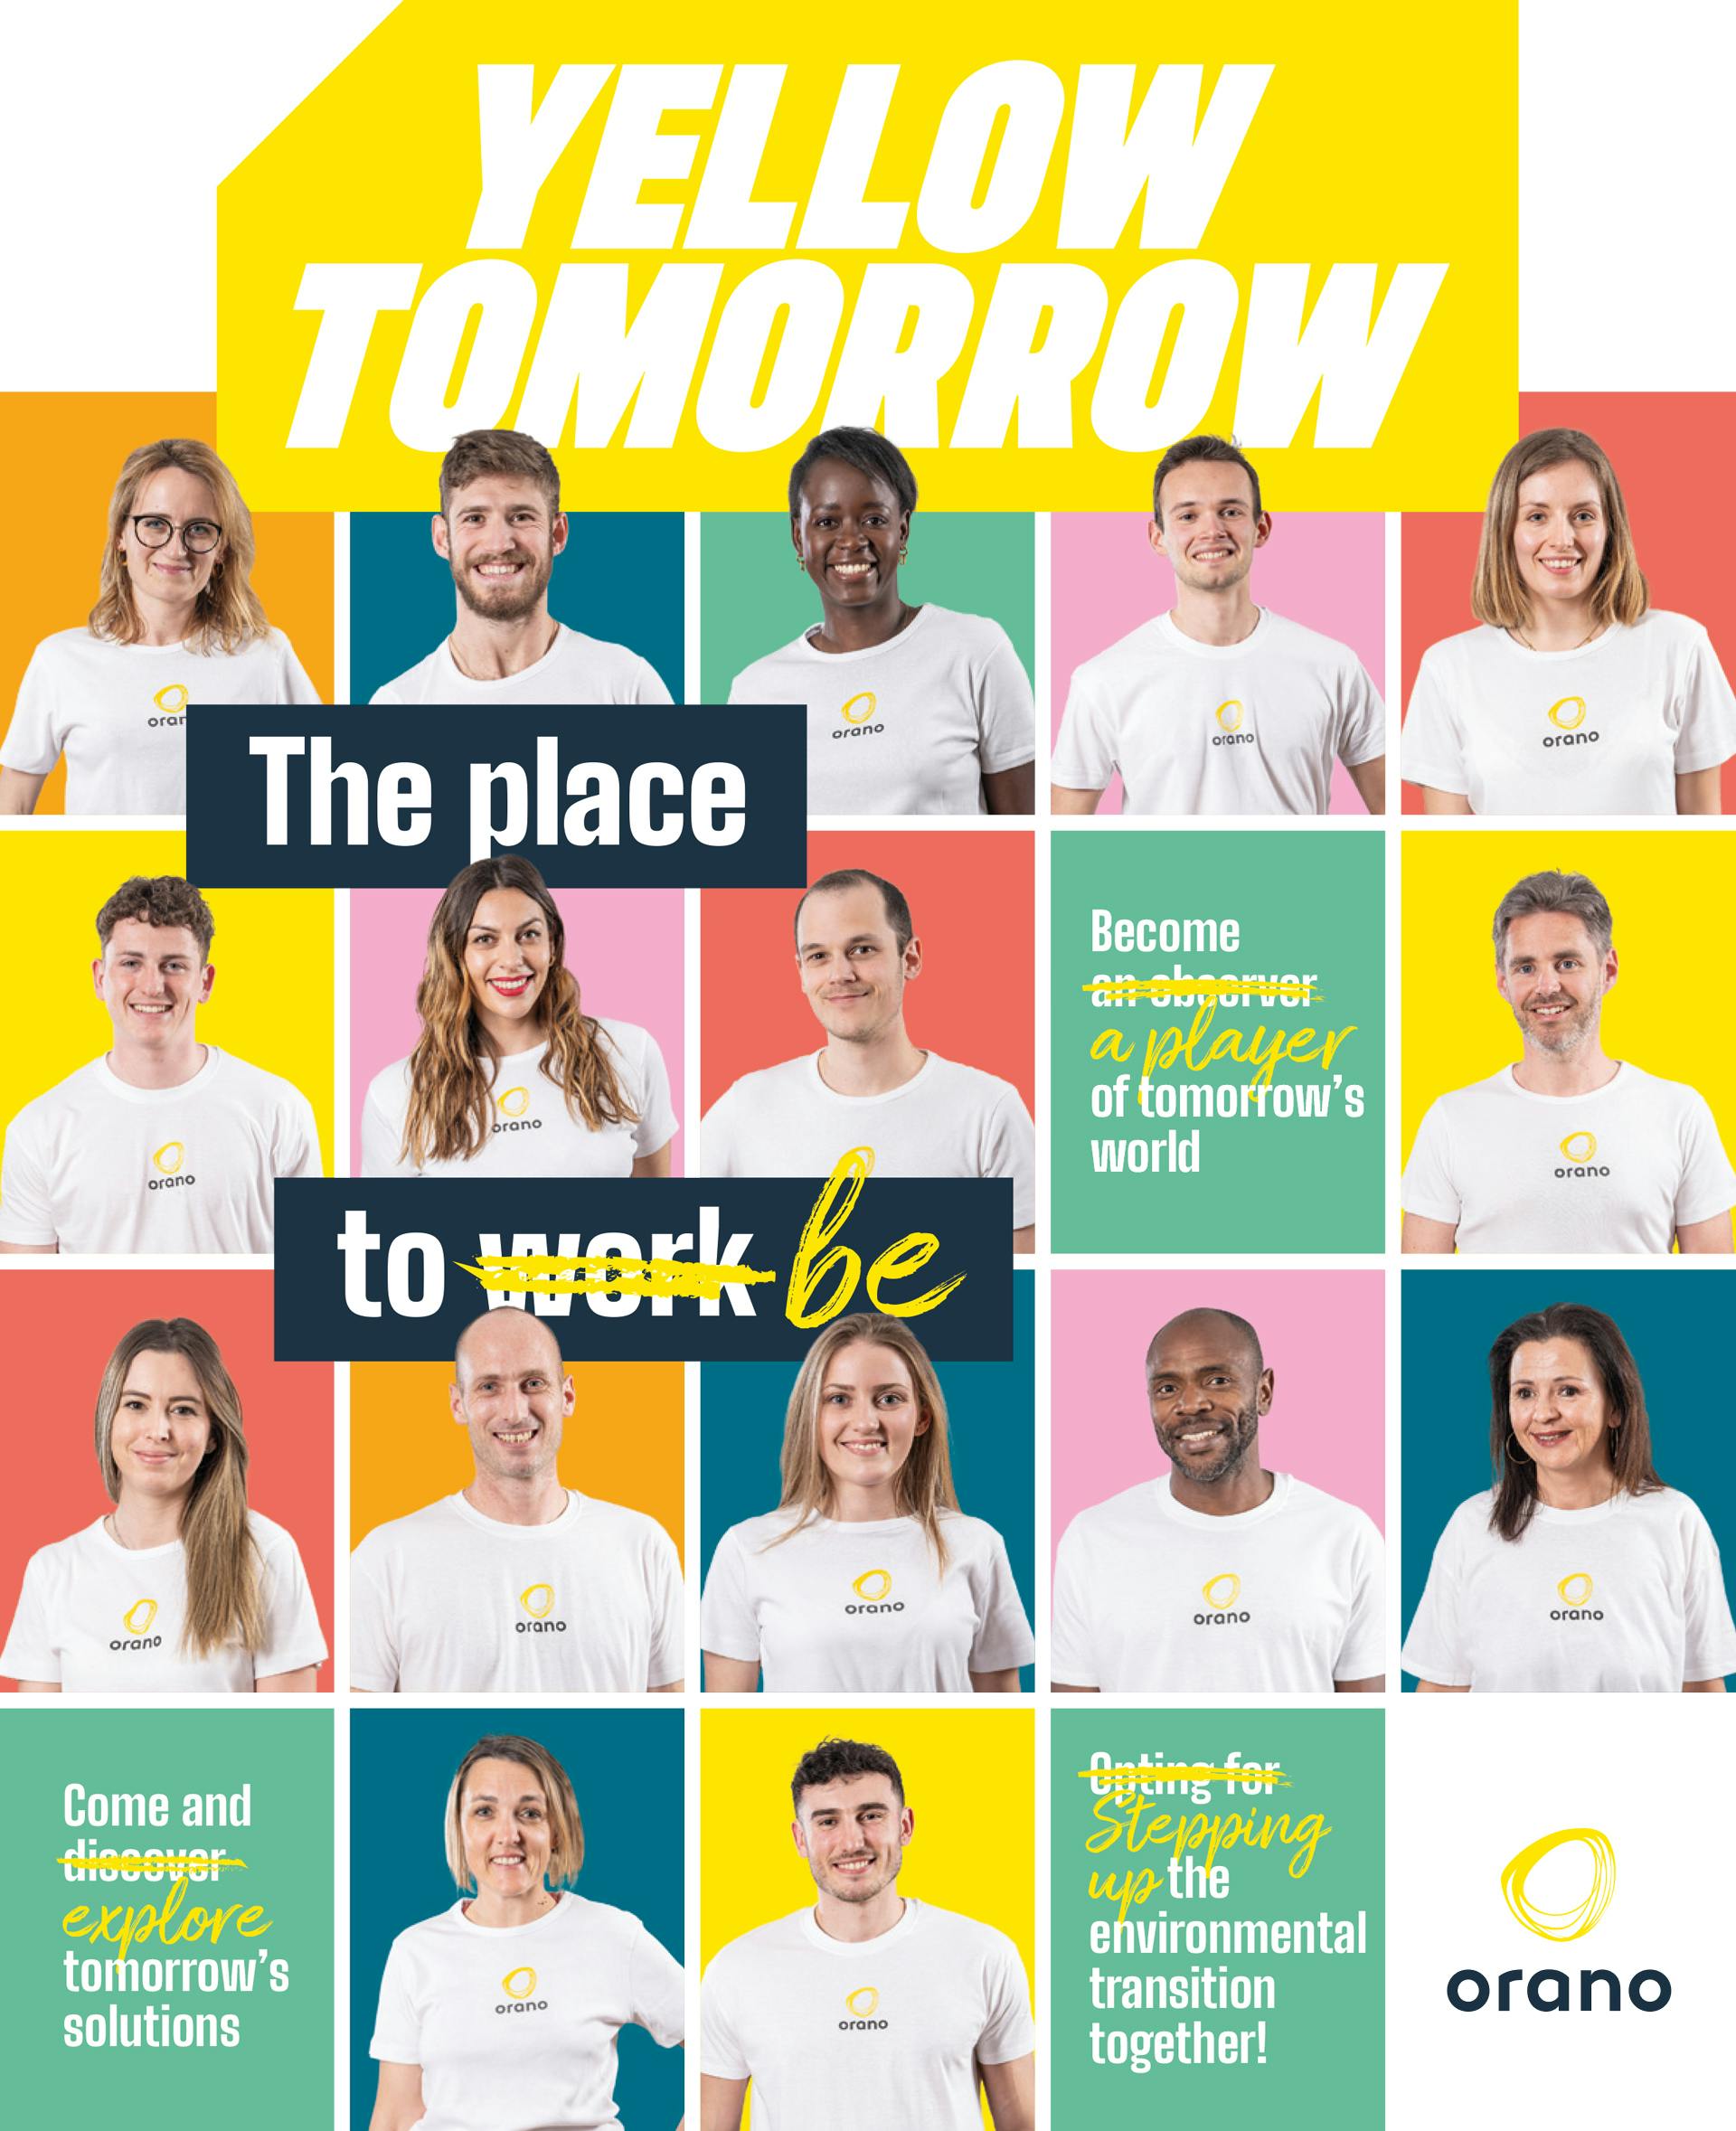 Yellow tomorrow. The place to be. Become a player of tomorrow's world. Come and explore tomorrow's solutions. Stepping up the environmental transition together! Orano